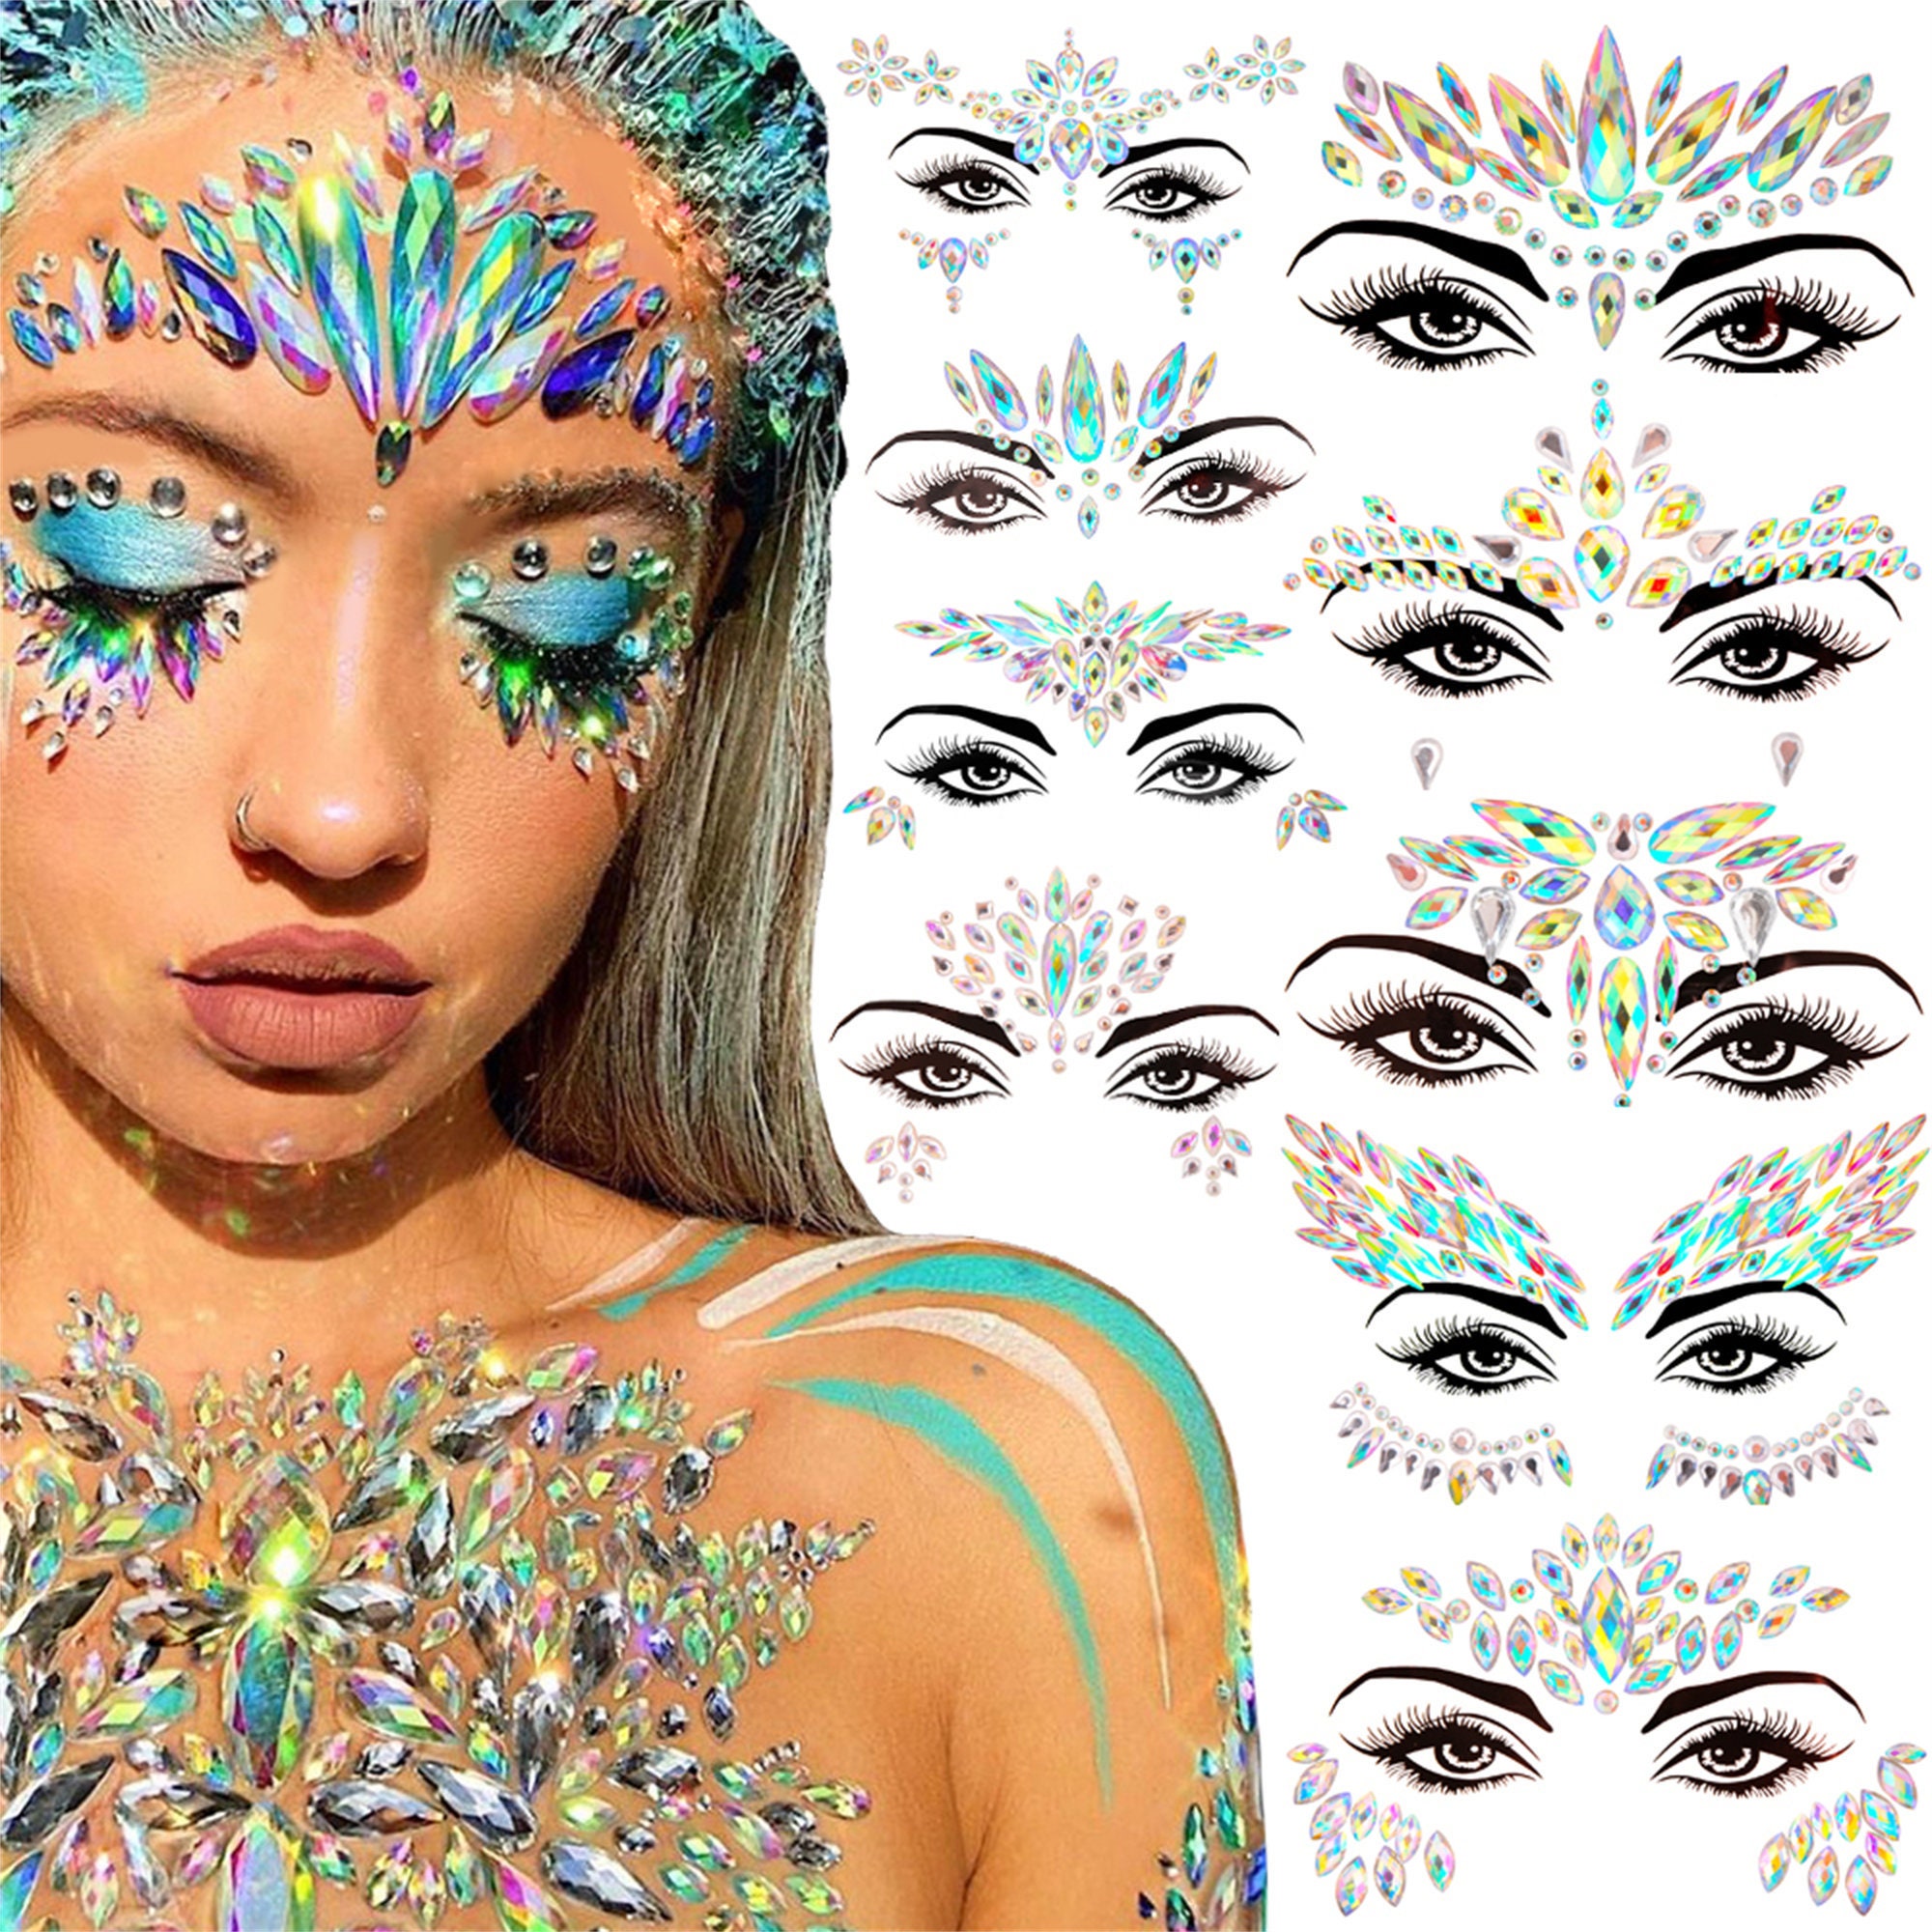 nothing a little gem can't fix ✨ which one is your fav? I kinda love t, rhinestone  eye makeup